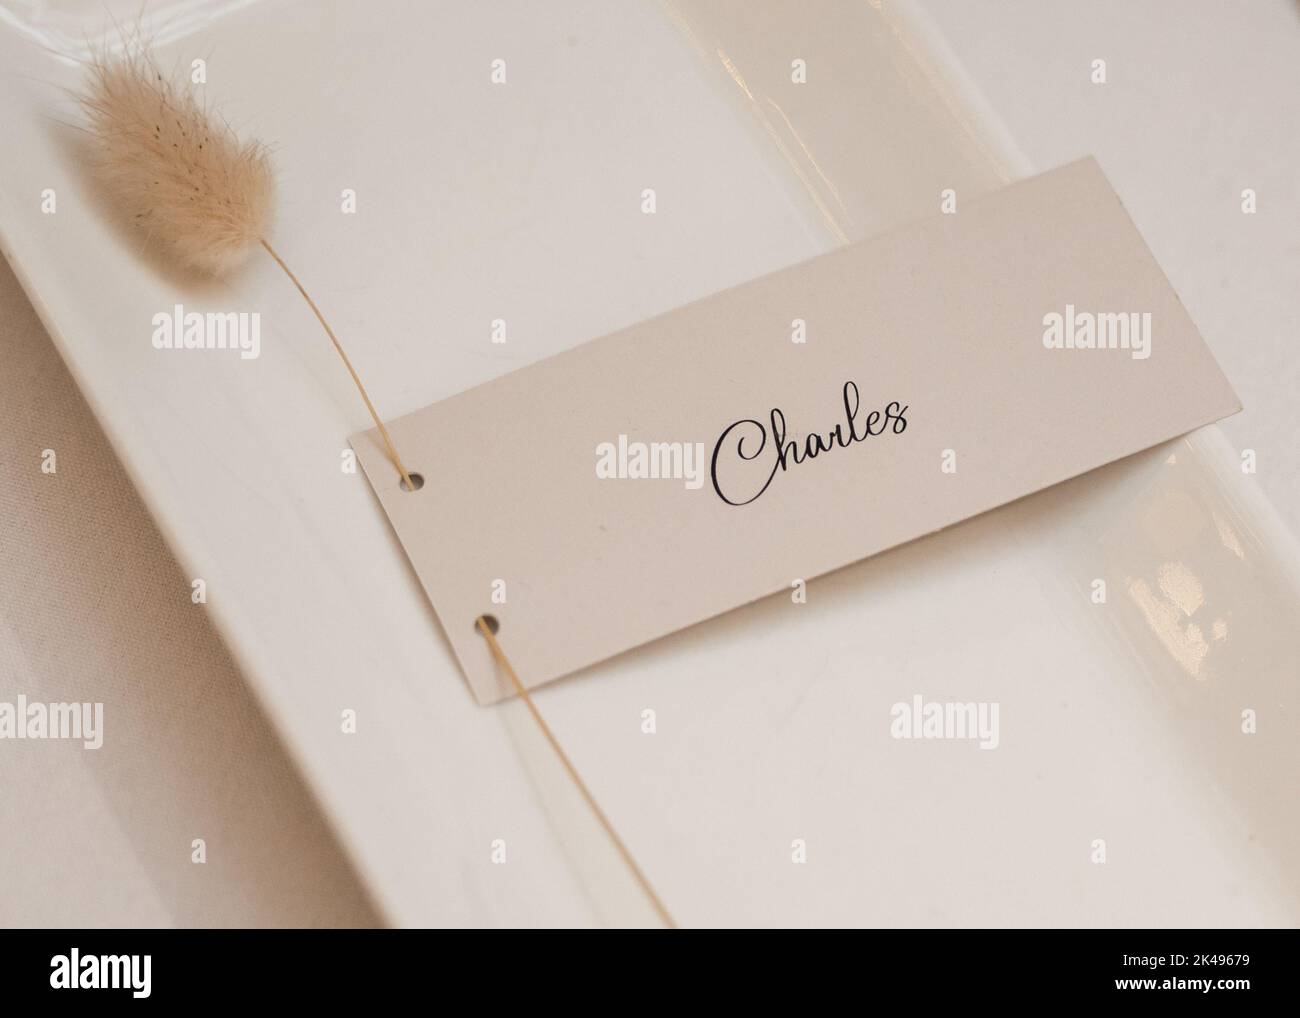 Charles name plate beautiful setting on table with scripted text Stock Photo